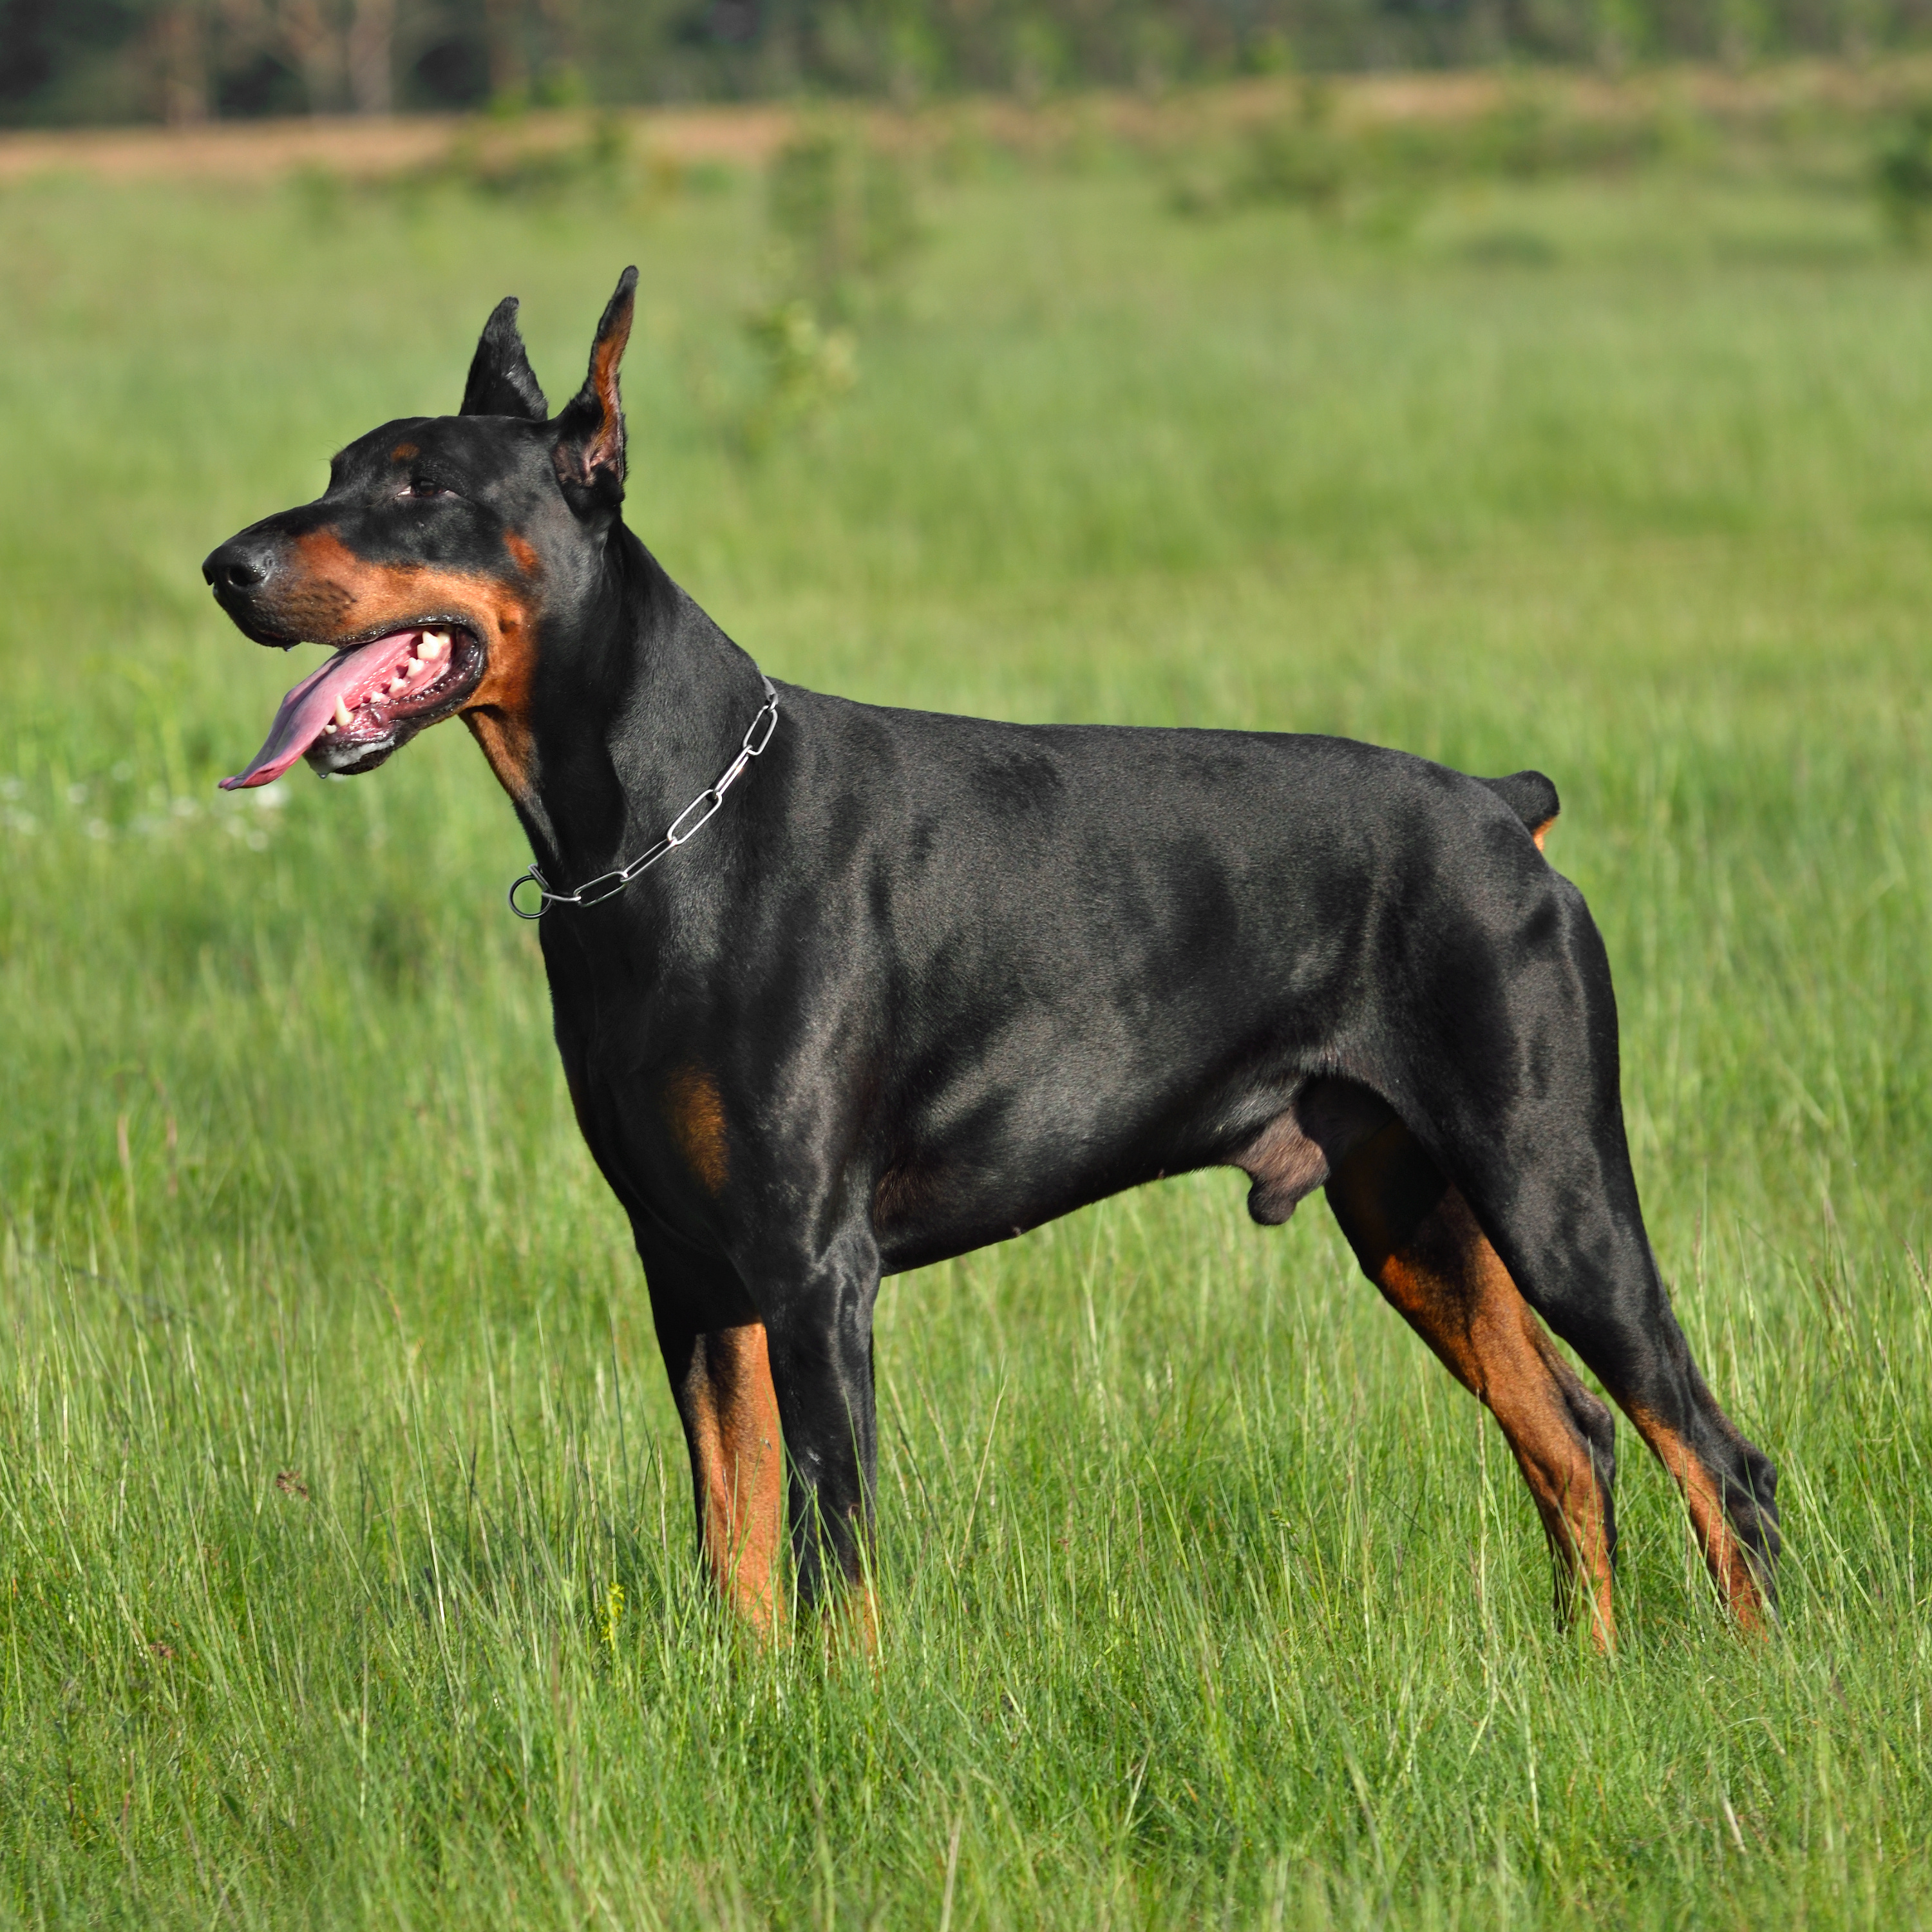 Dog Training Elite has expert Doberman training in Fort Wayne, IN
																															 that are experienced in a variety of positive training methods for Dobermans.